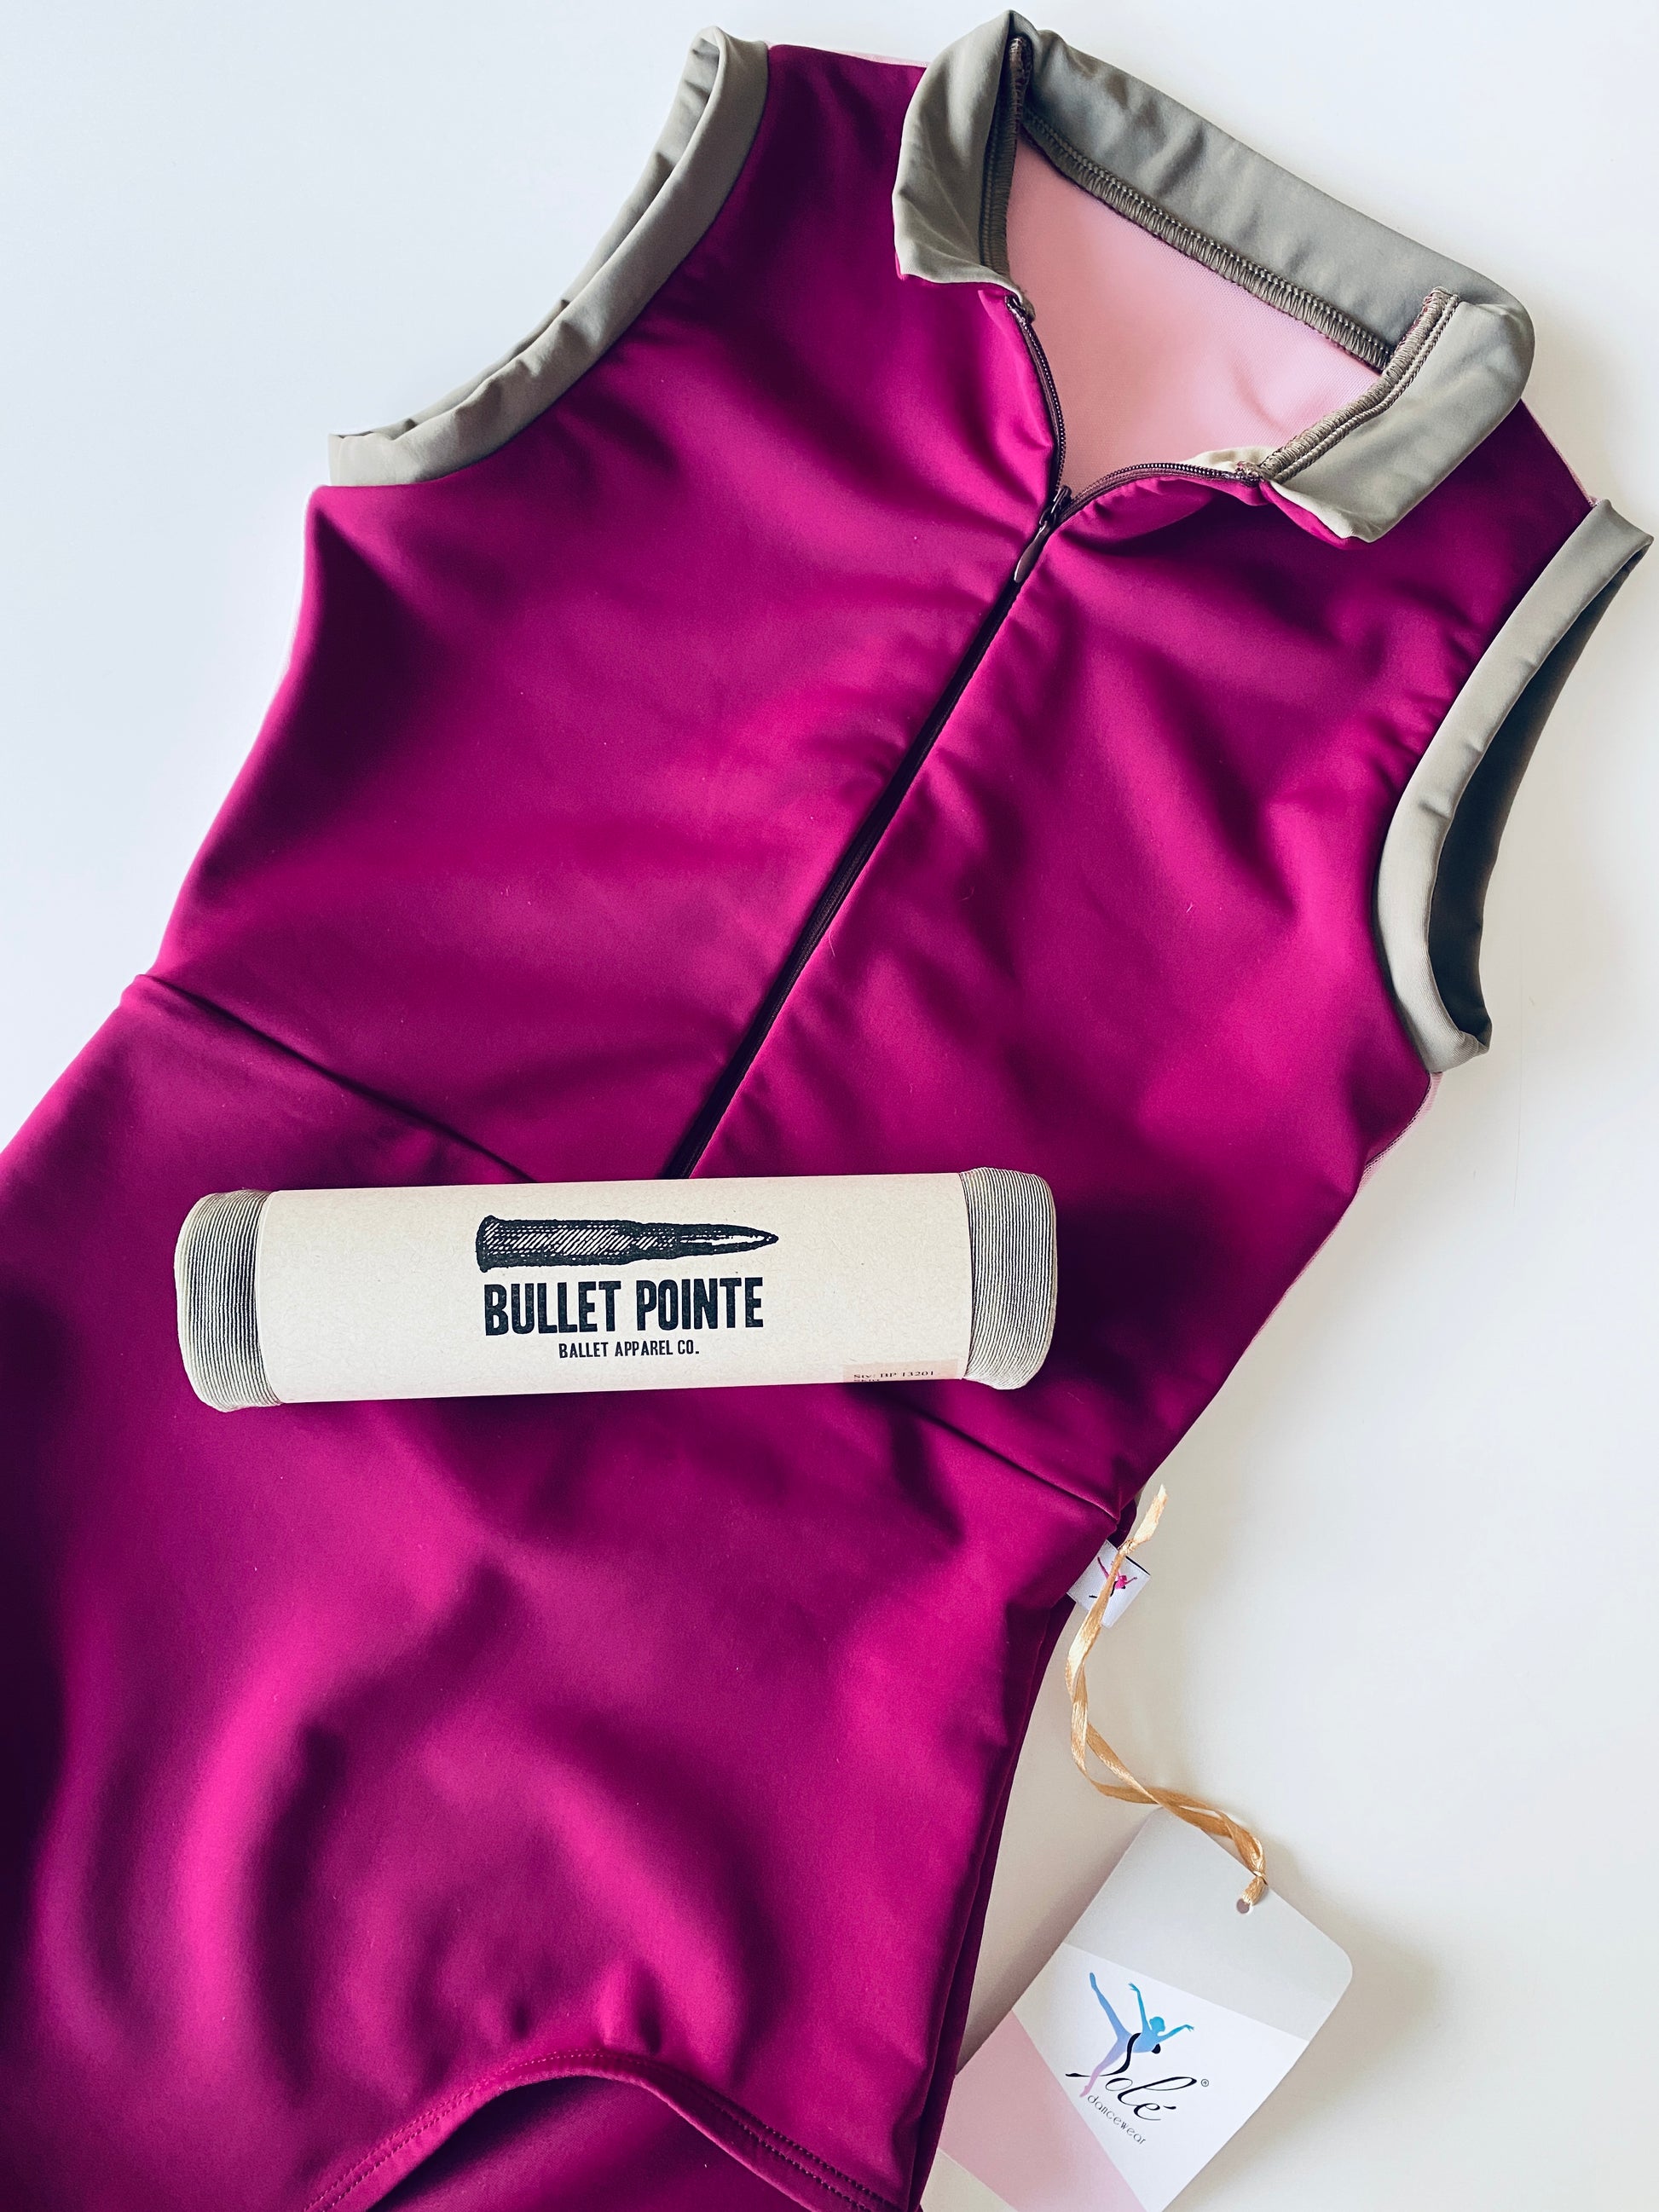 Sole Dancewear New York ballet dance leotard in Amaranto and Mink from The Collective Dancewear matched with Bullet Pointe sab skirt in Sage 